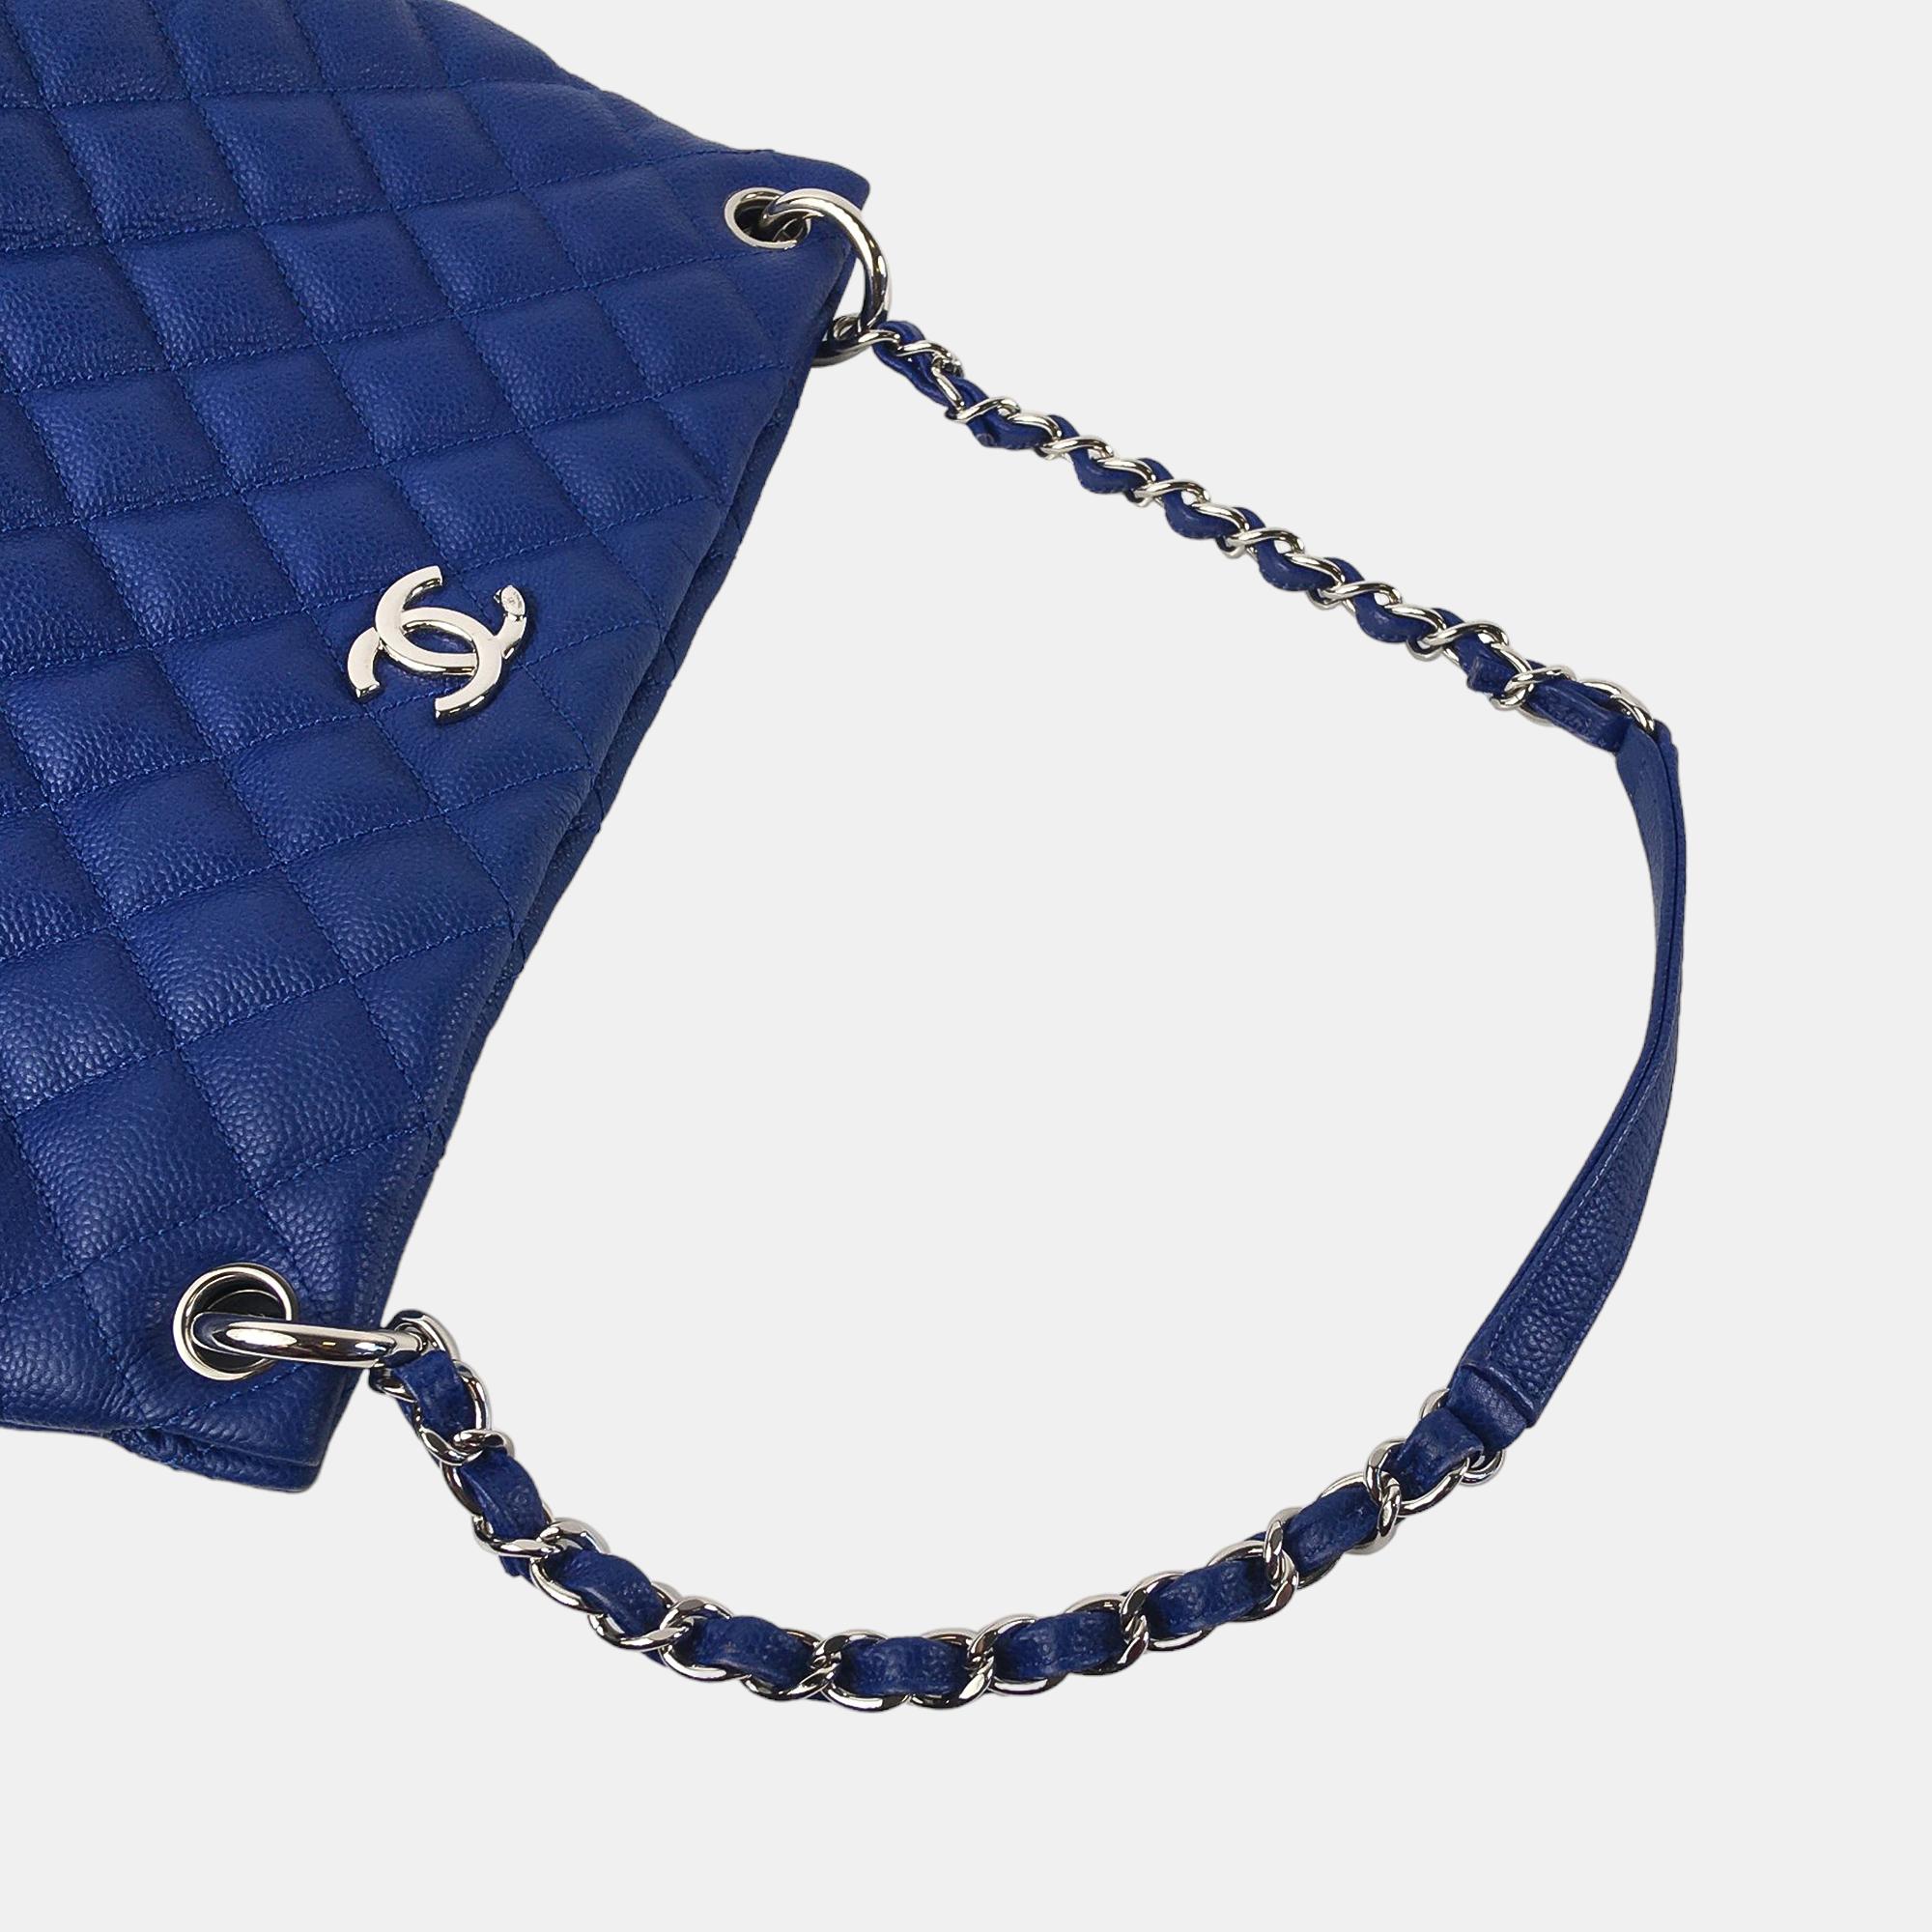 Chanel Blue Easy Caviar Leather Tote Bag